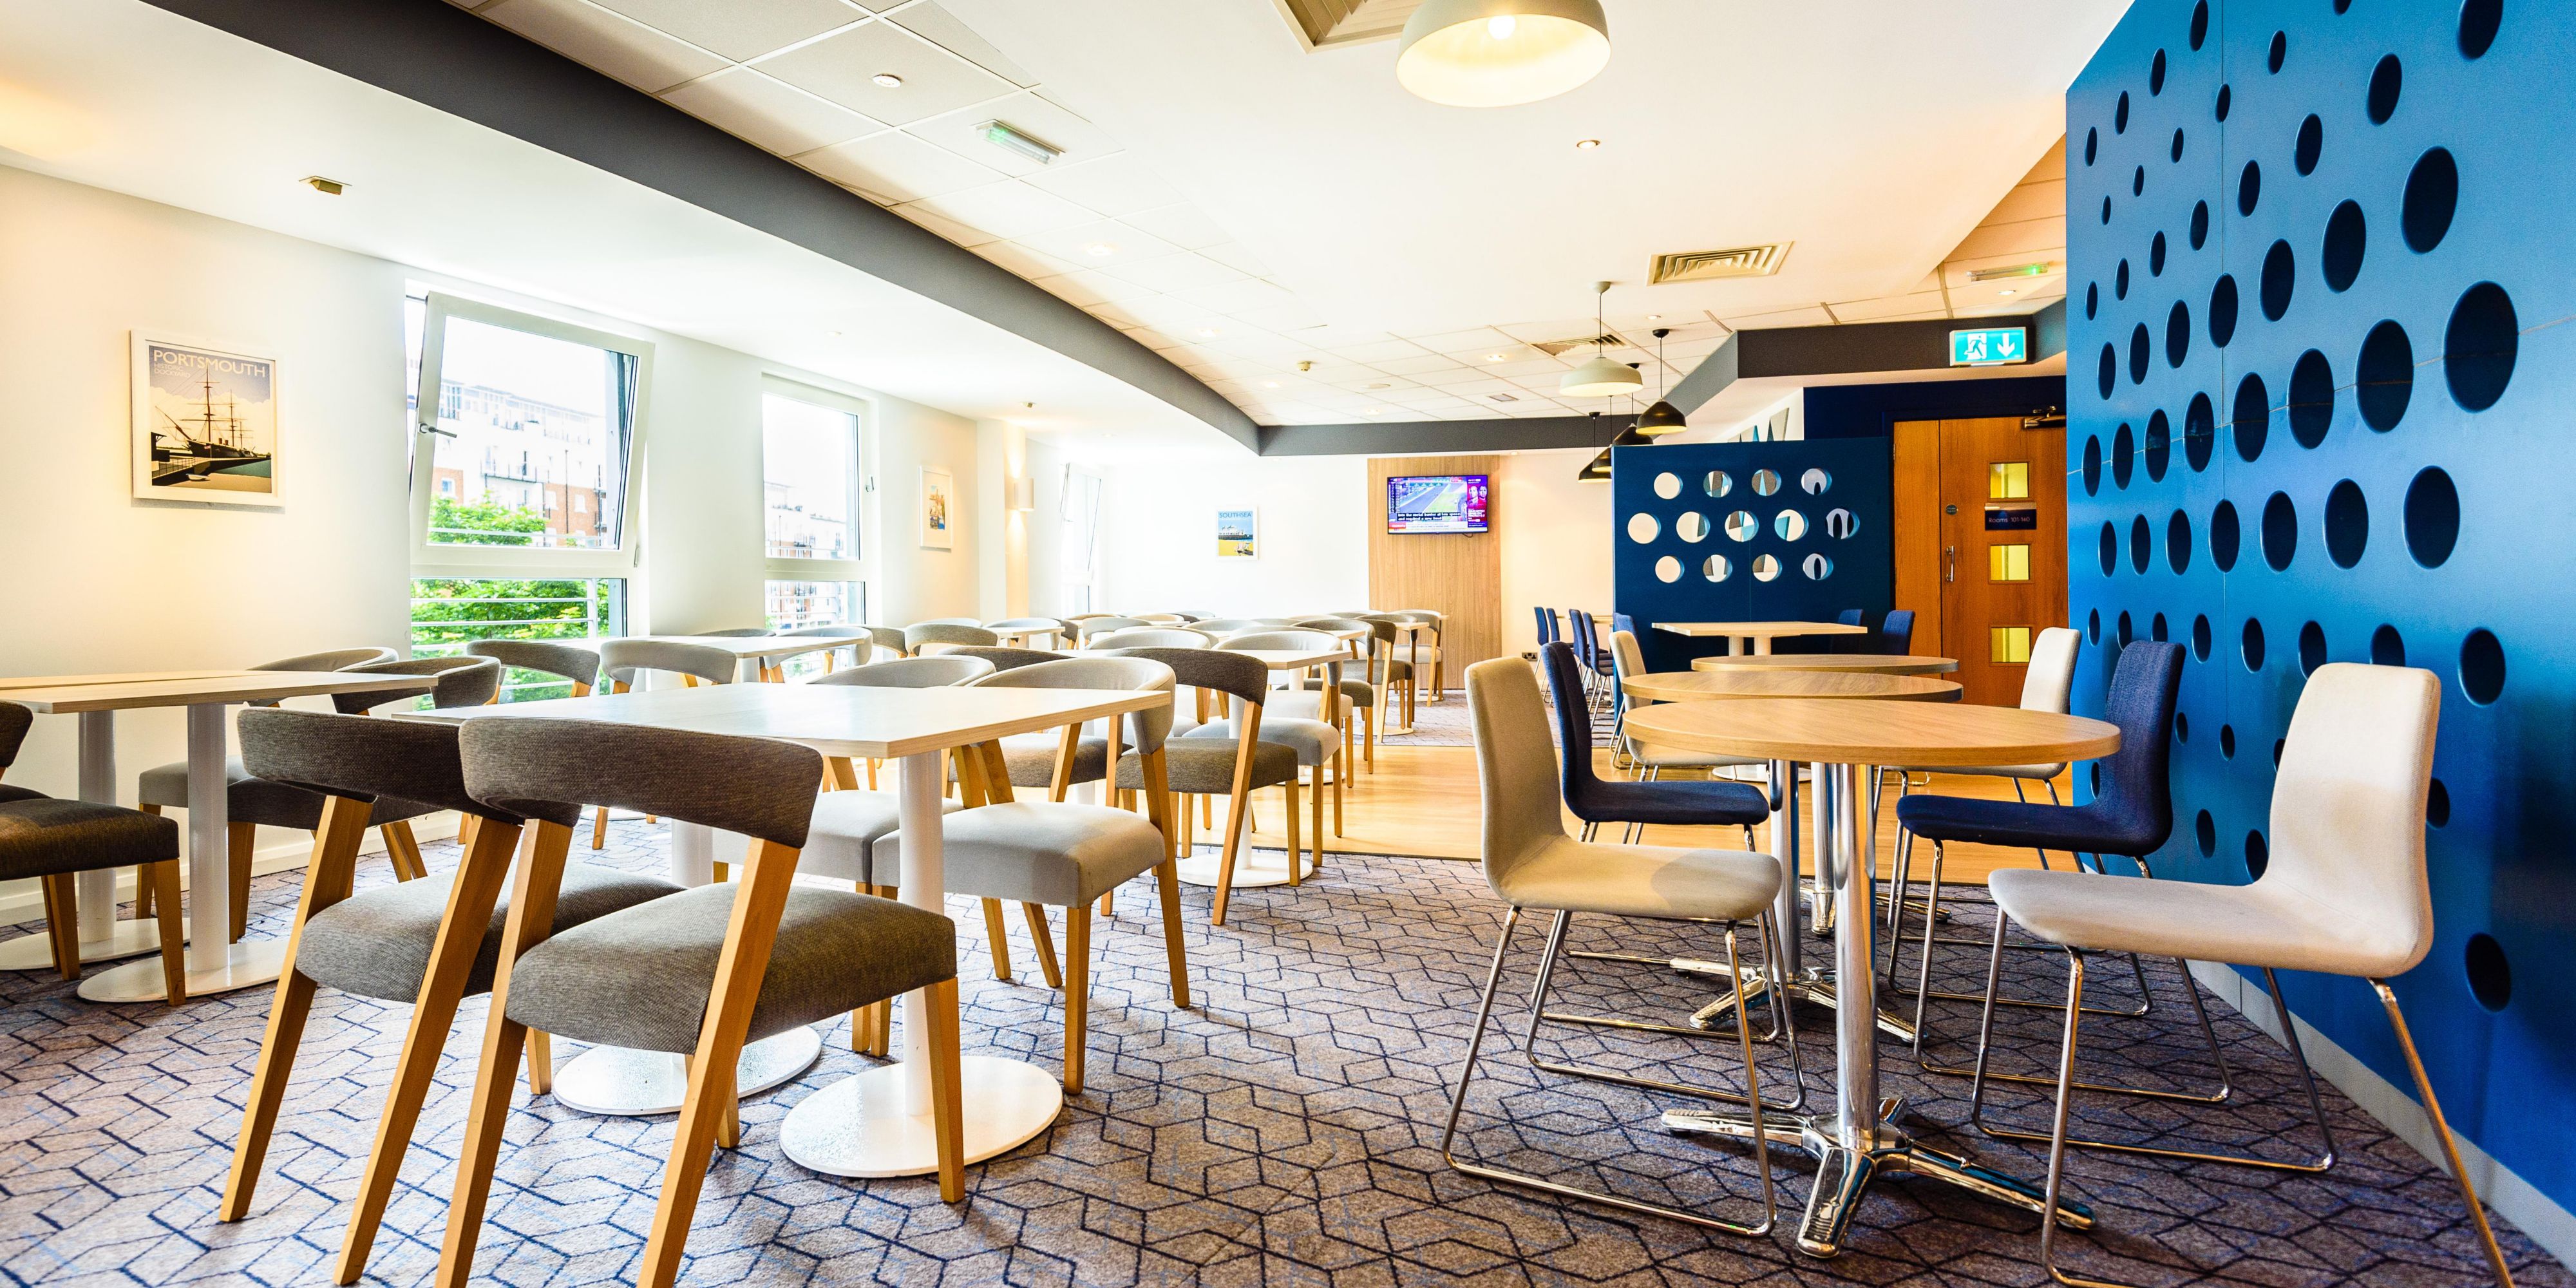 Here at Holiday Inn Express Portsmouth - Gunwharf Quays, we're committed to providing all our guests with a great start to the day with a special Express Start Breakfast. 

